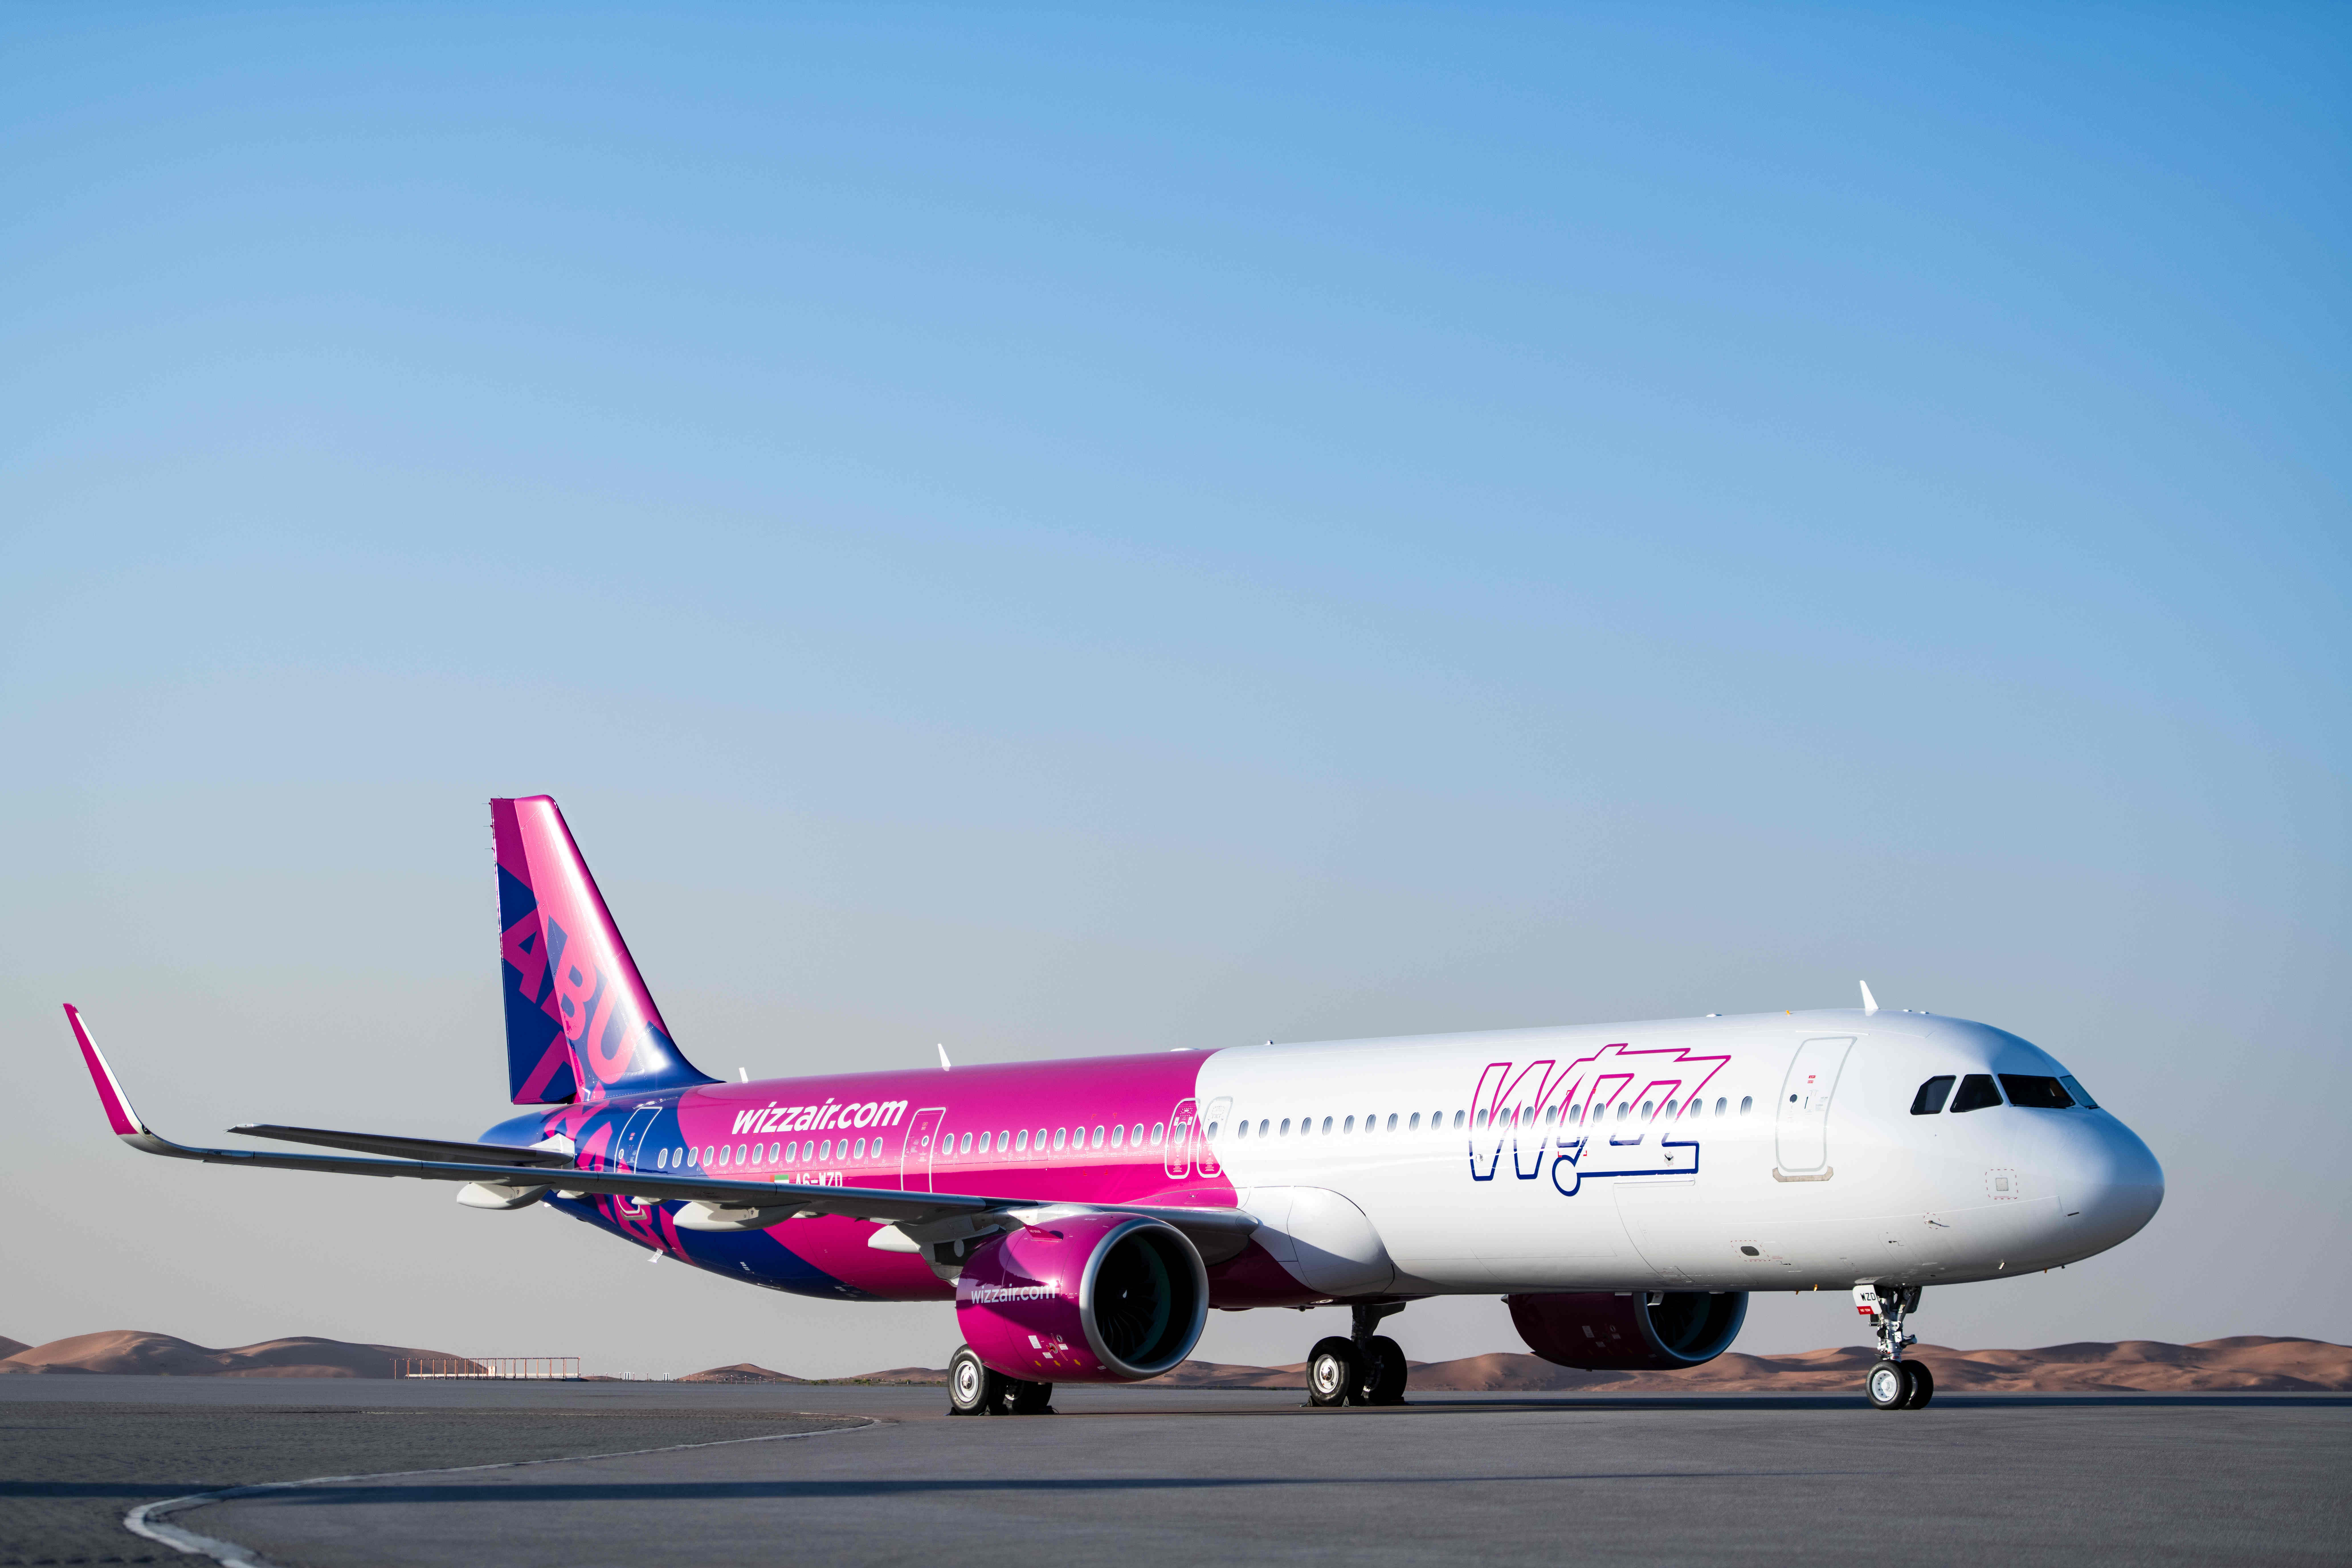 Wizz Air Abu Dhabi Launches New Promotion As Part Of UAE Golden Jubilee And National Day Celebrations